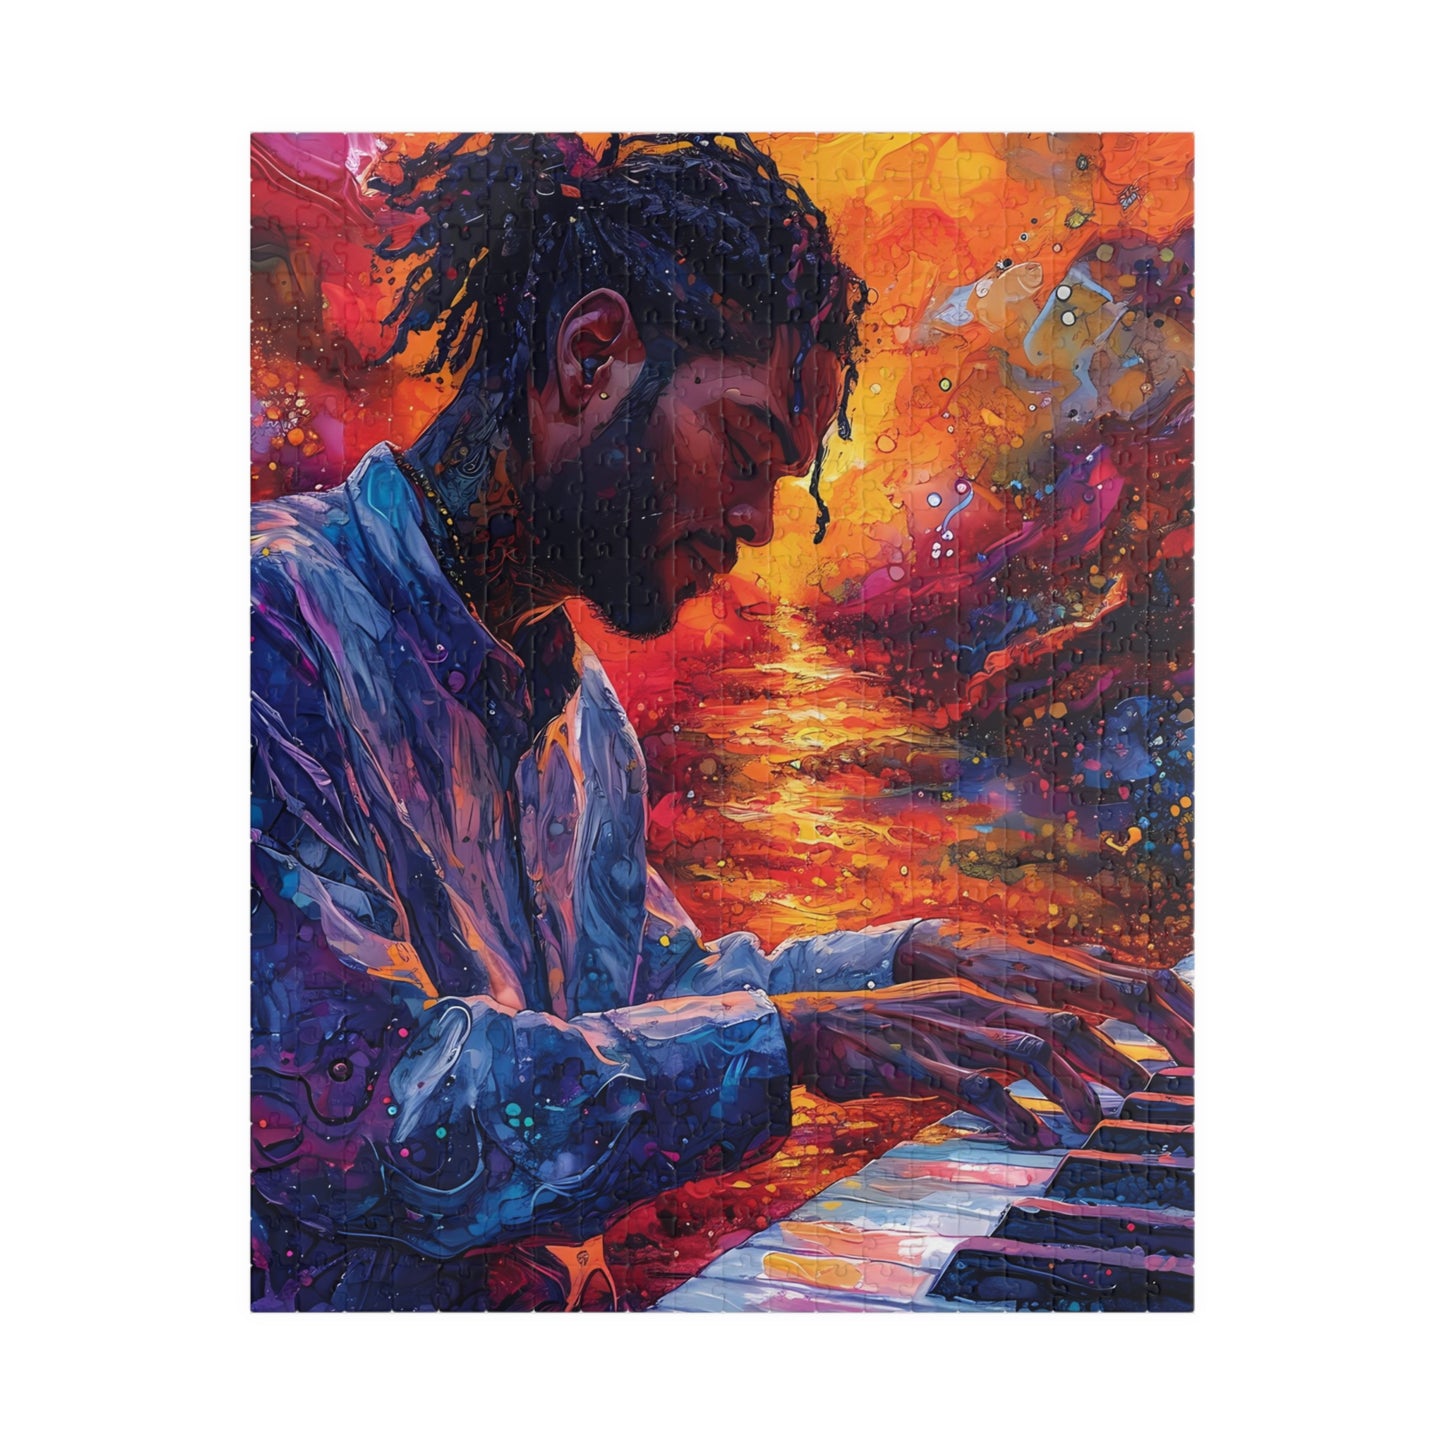 Jazz Pianist Dreams - Colorful Abstract Art Puzzle